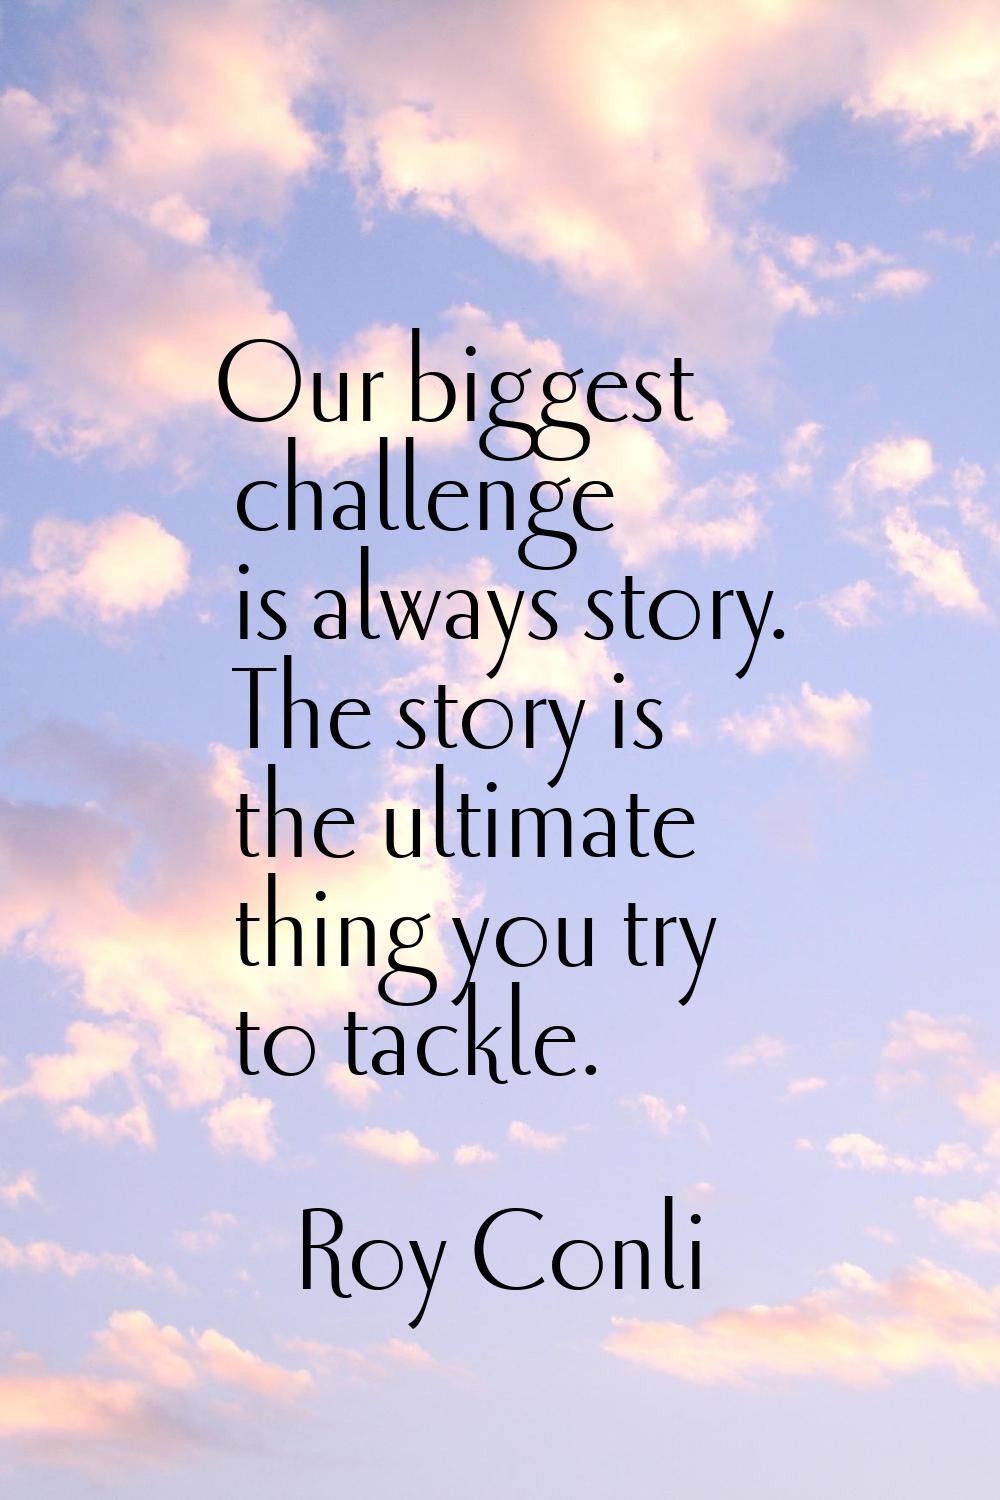 Our biggest challenge is always story. The story is the ultimate thing you try to tackle.